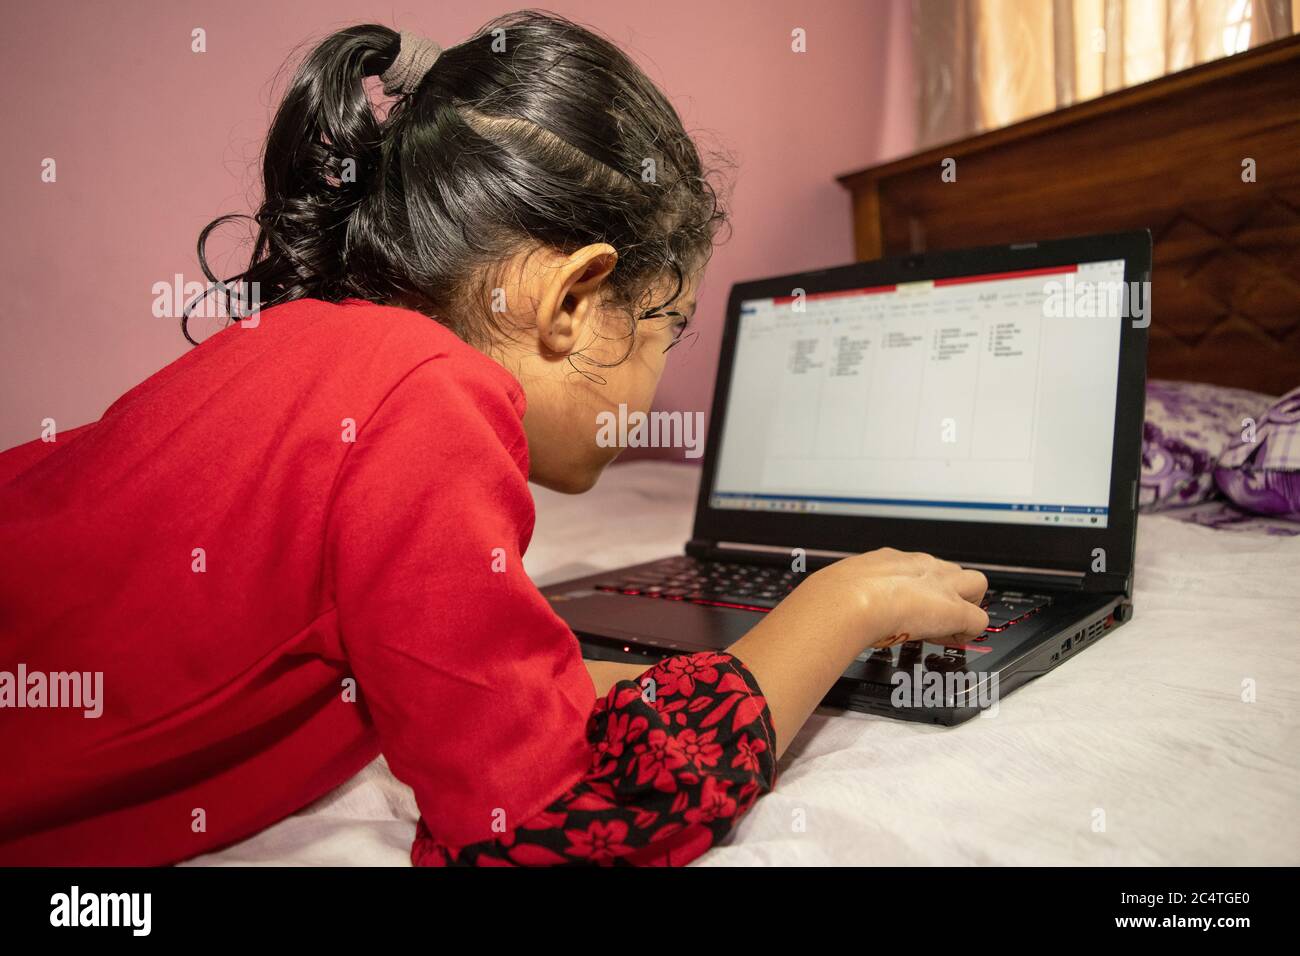 a girl working from home during pandamic covid 19 Stock Photo